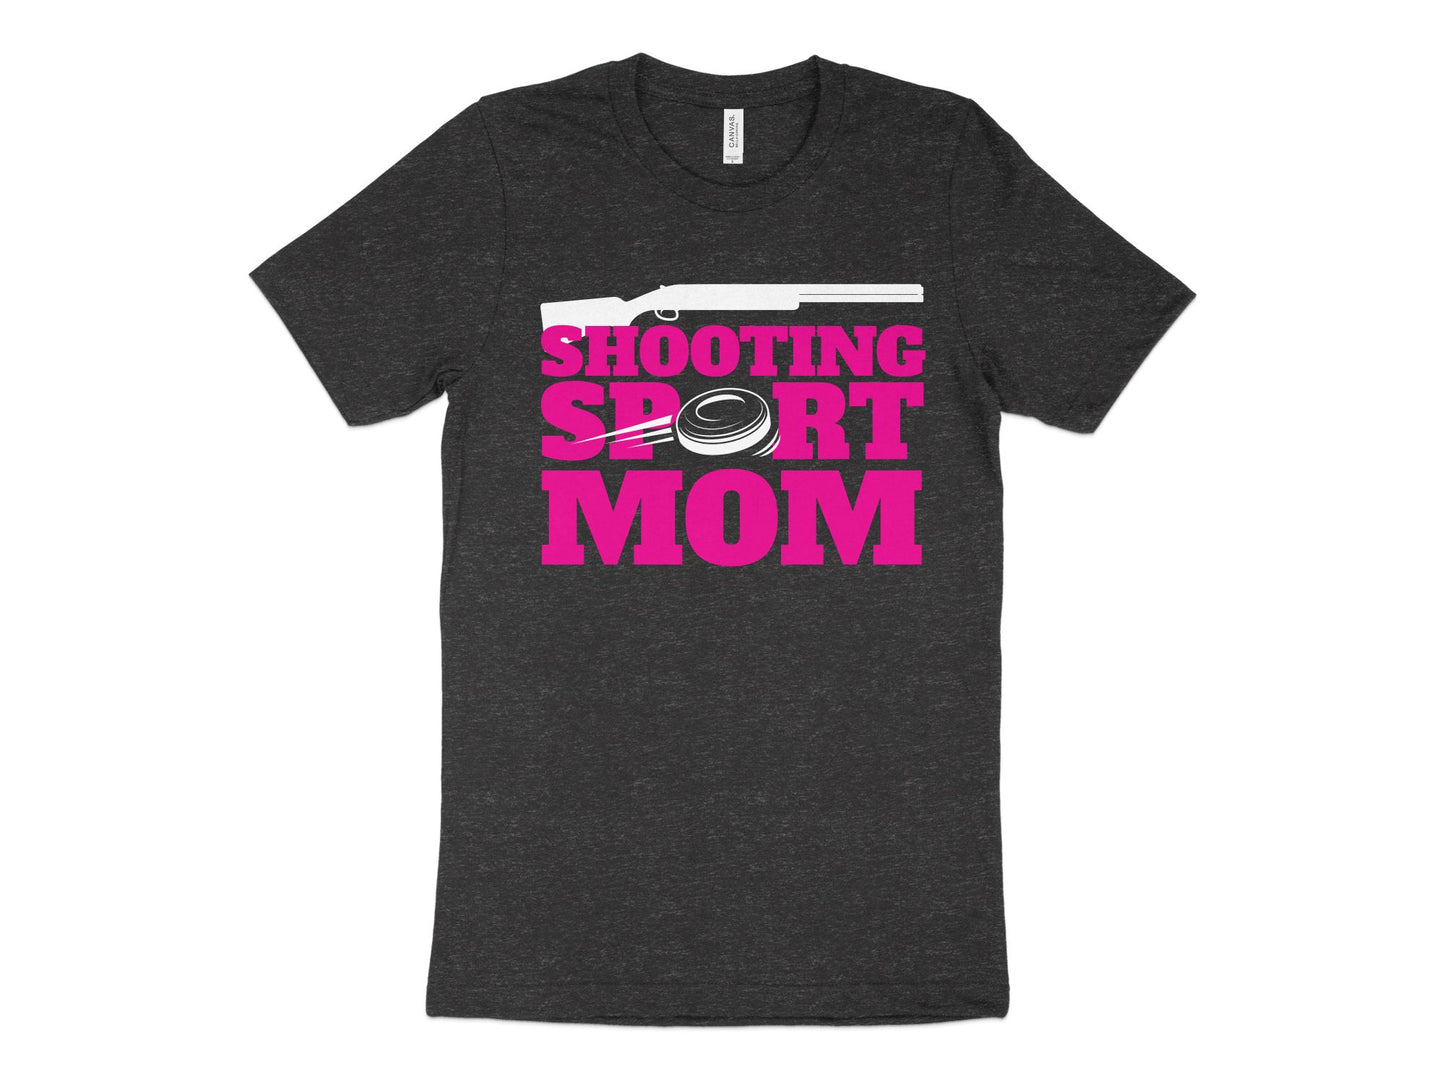 Trap Shooting Shirt for Moms, charcoal